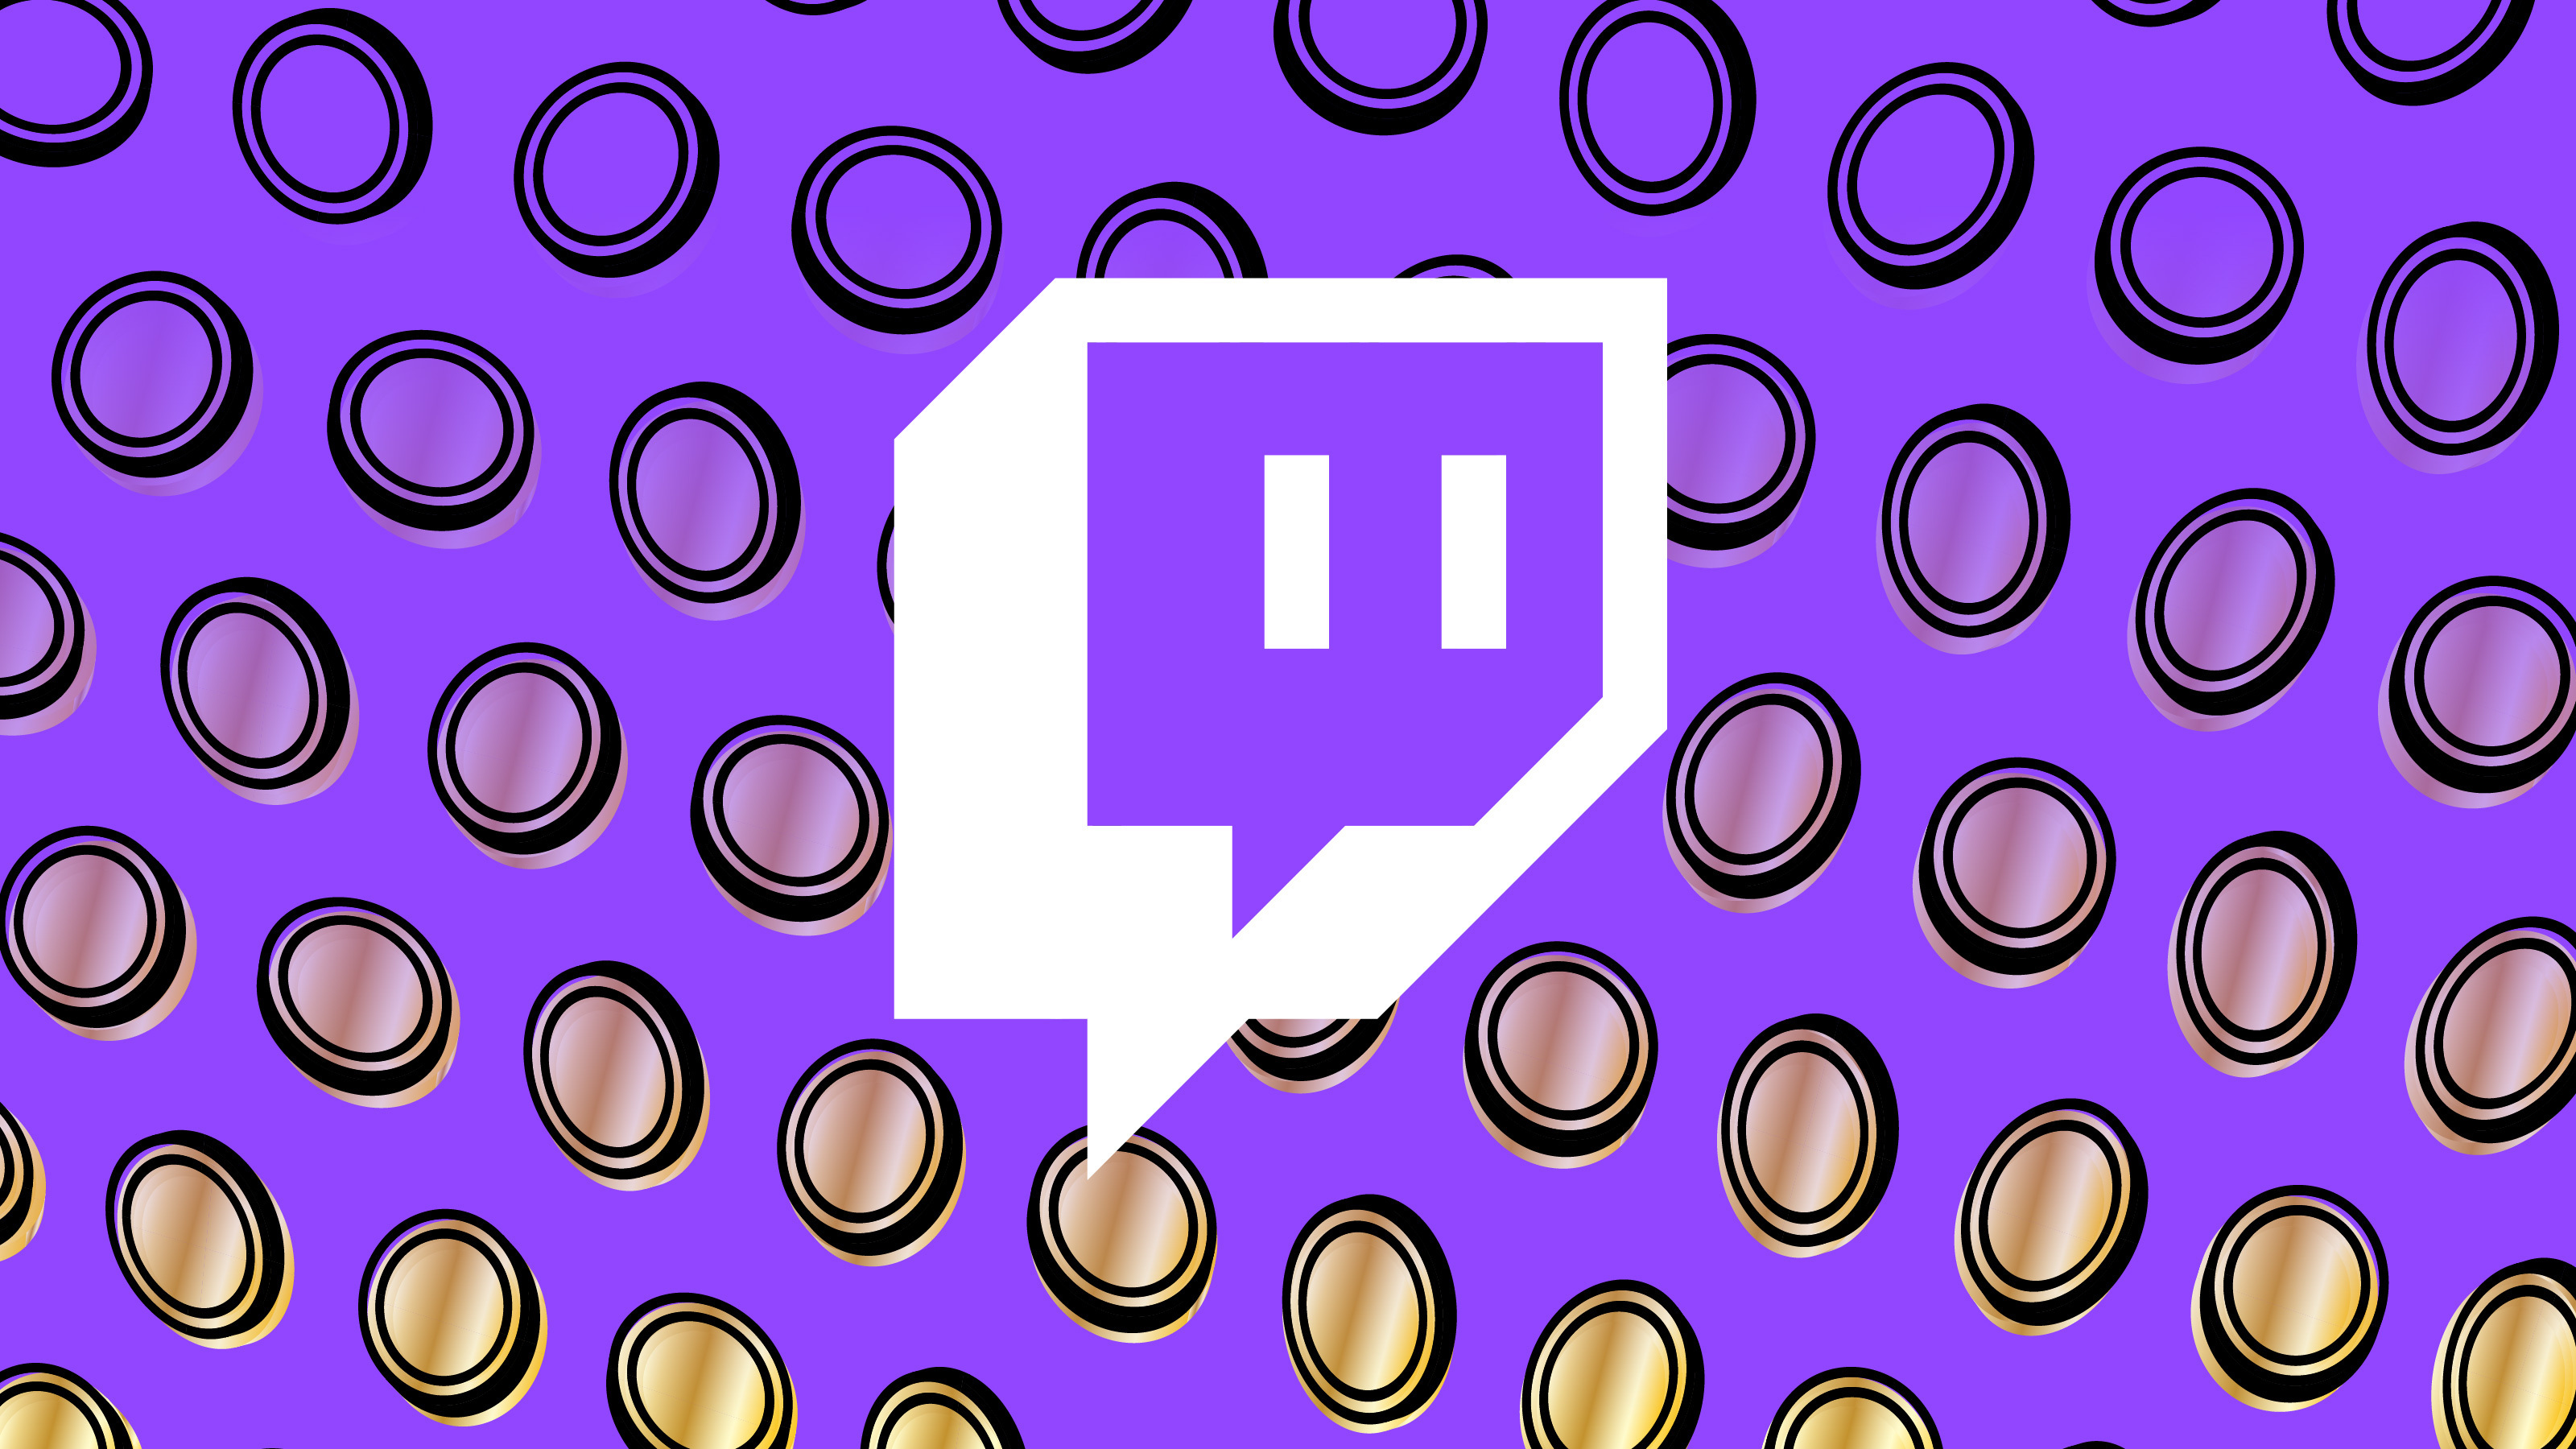 Twitch to shut down in Korea over 'prohibitively expensive' network fees | TechCrunch